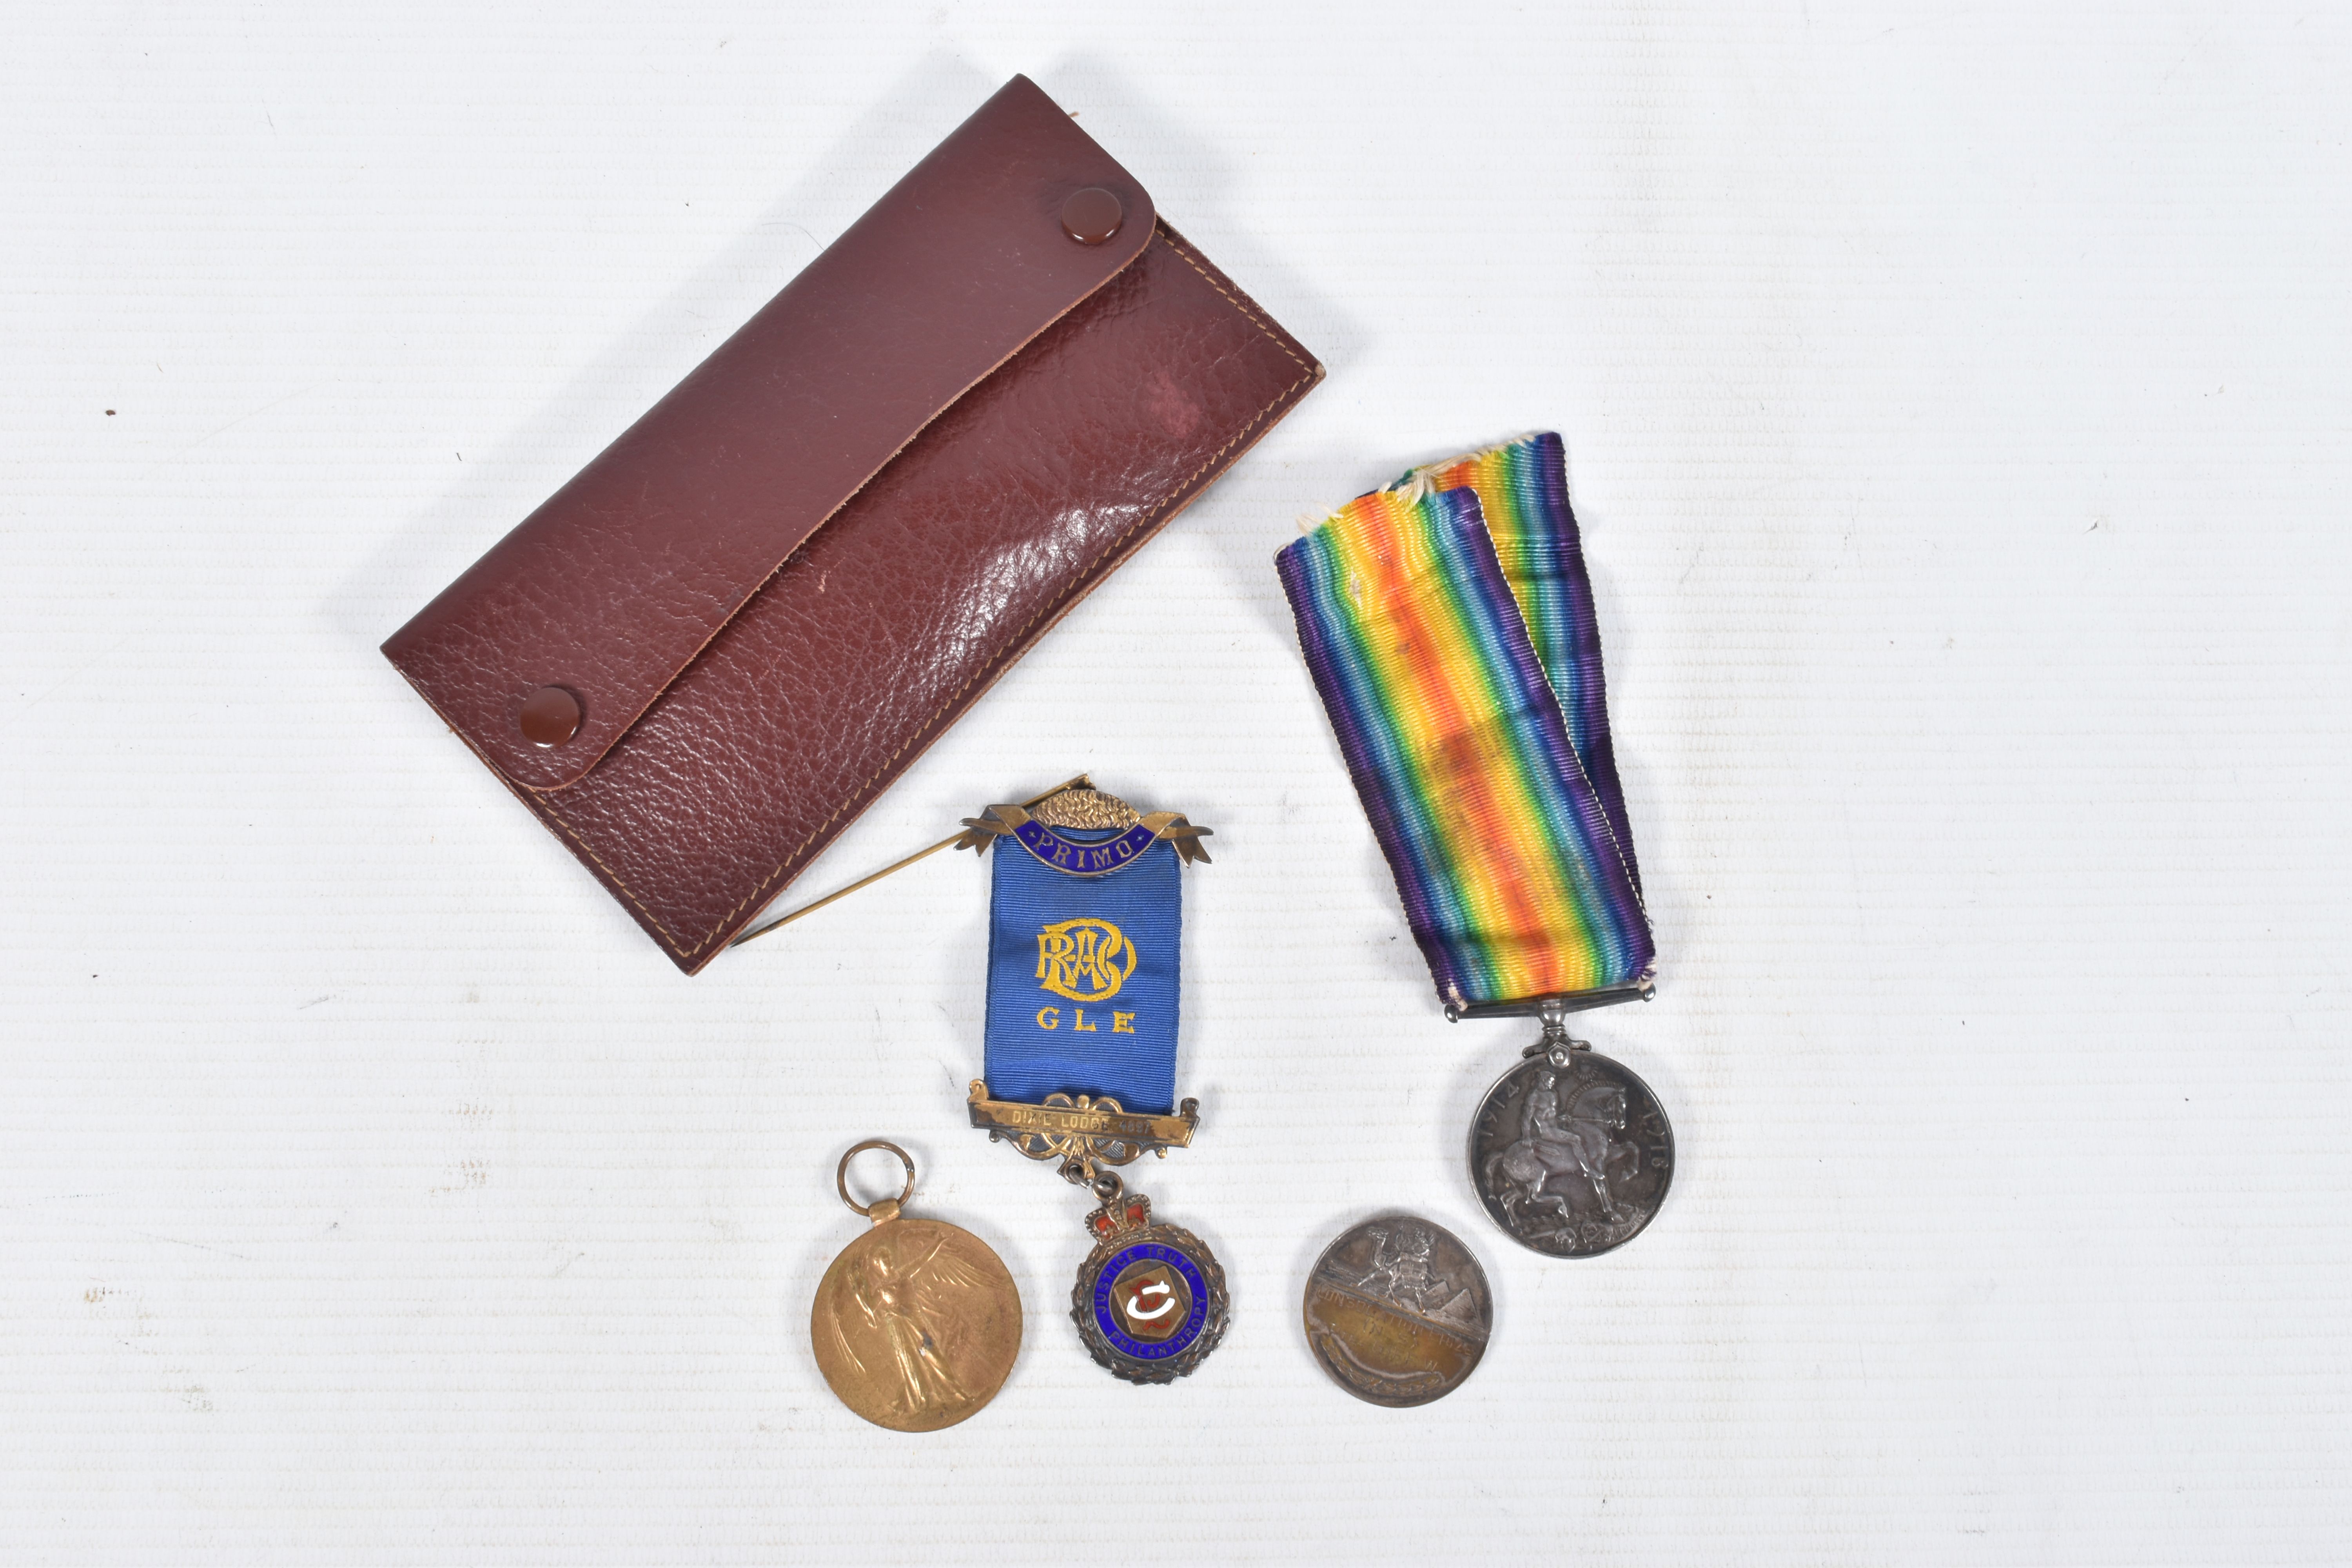 A WWI SCOTTISH RIFLES PAIR OF MEDALS, shooting medal and a ROAB medal, the medals are correctly